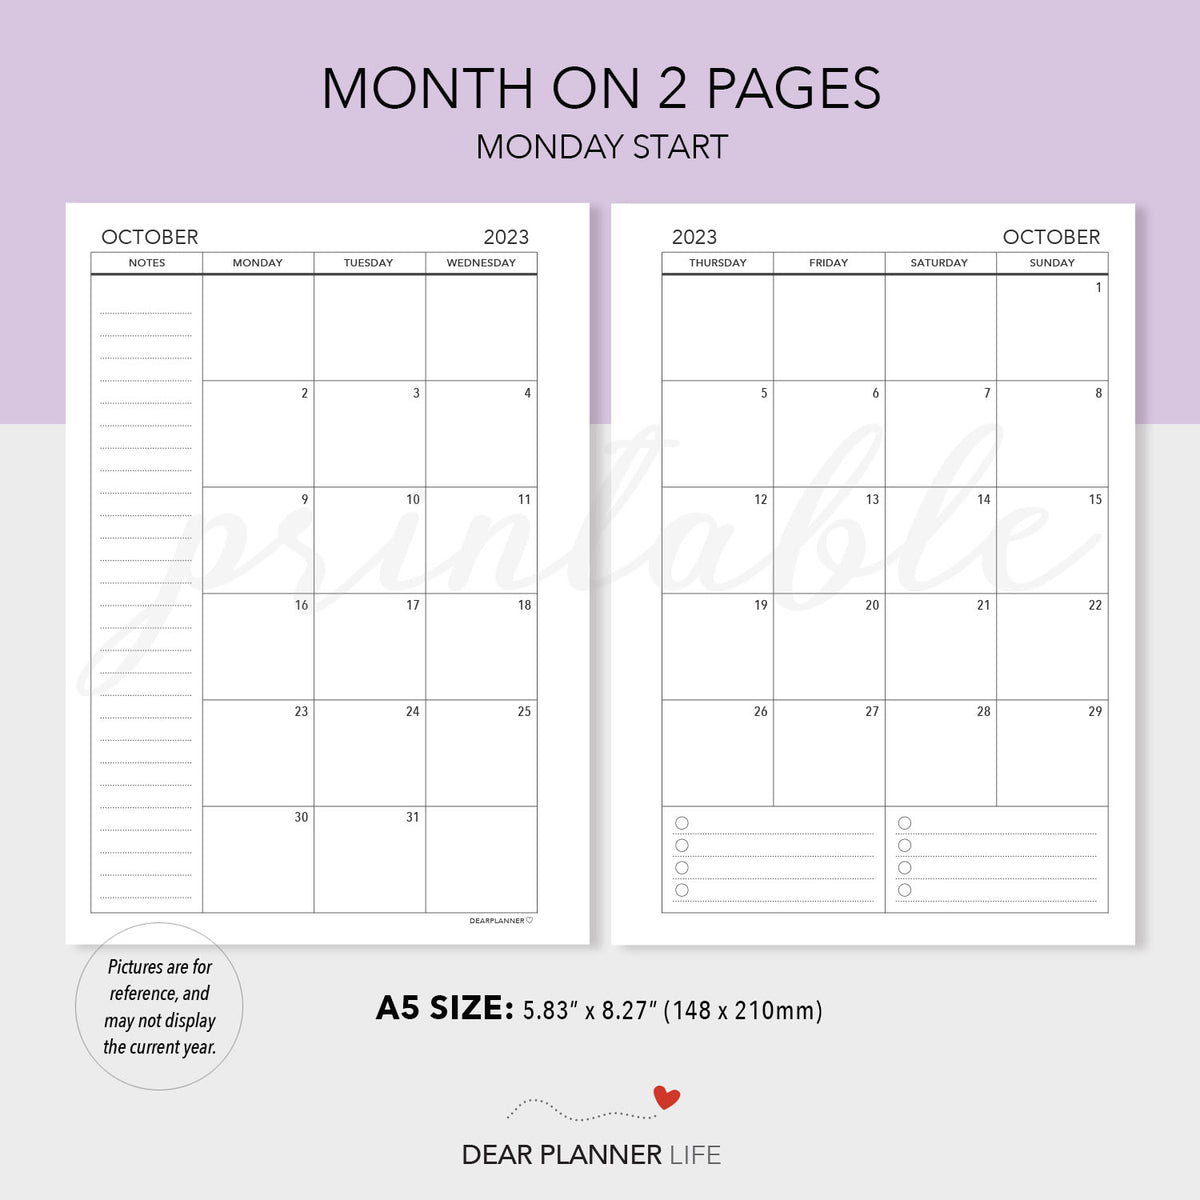 2023 A5 Size Calendar Month on 2 Pages (Monday Start) Printable PDF